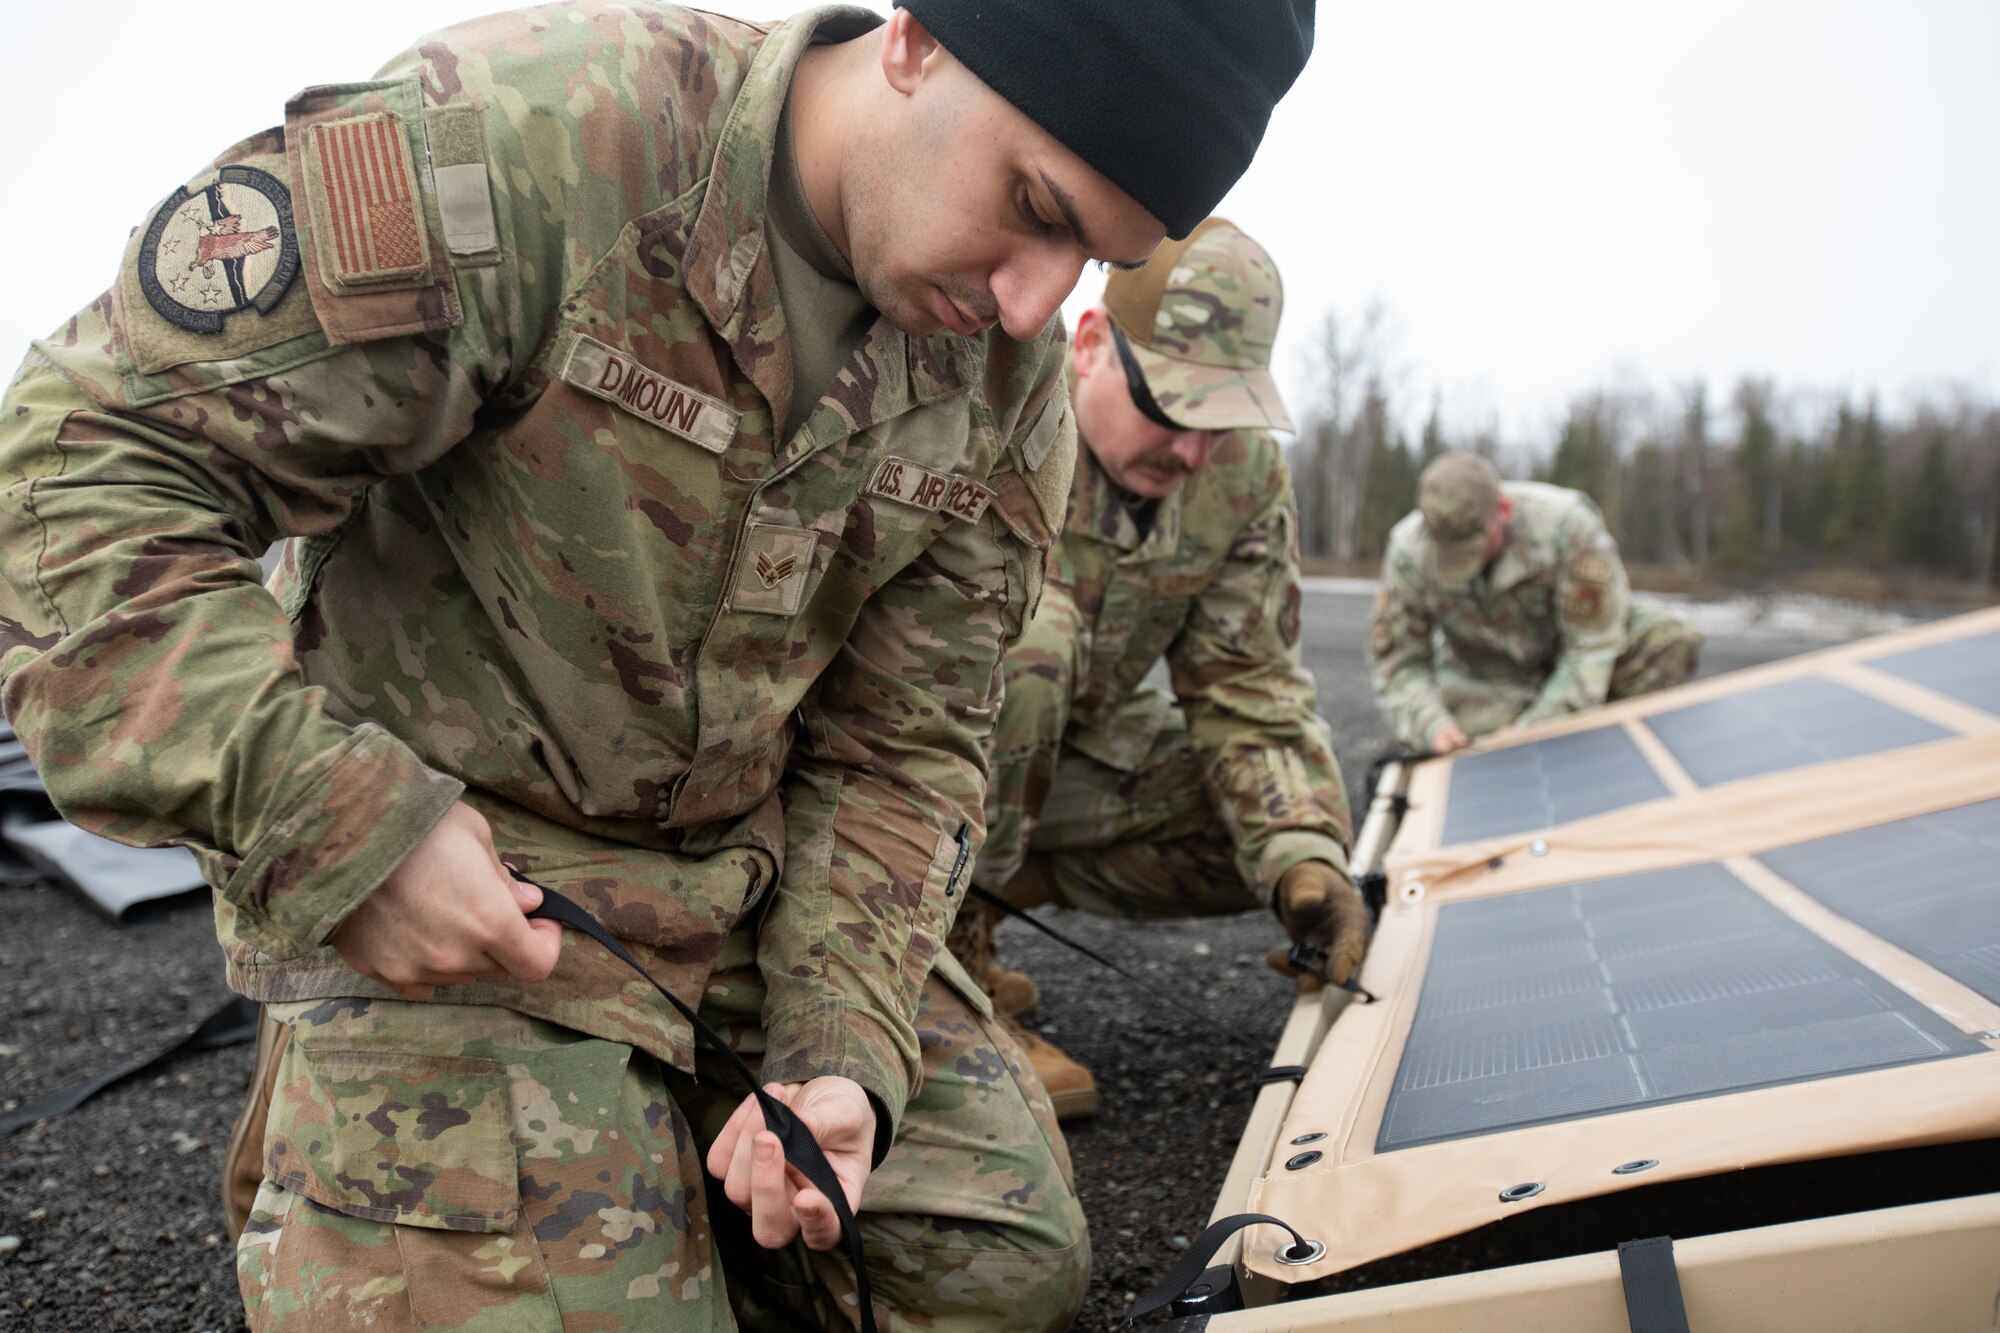 U.S. Air Force Senior Airman John Damouni, left, a water and fuel systems maintenance journeyman assigned to 773rd Civil Engineer Squadron, secures solar panels to an air transportable clinic tent at Camp Mad Bull, during Northern Edge 23-1, at Joint Base Elmendorf-Richardson, Alaska, May 9, 2023.